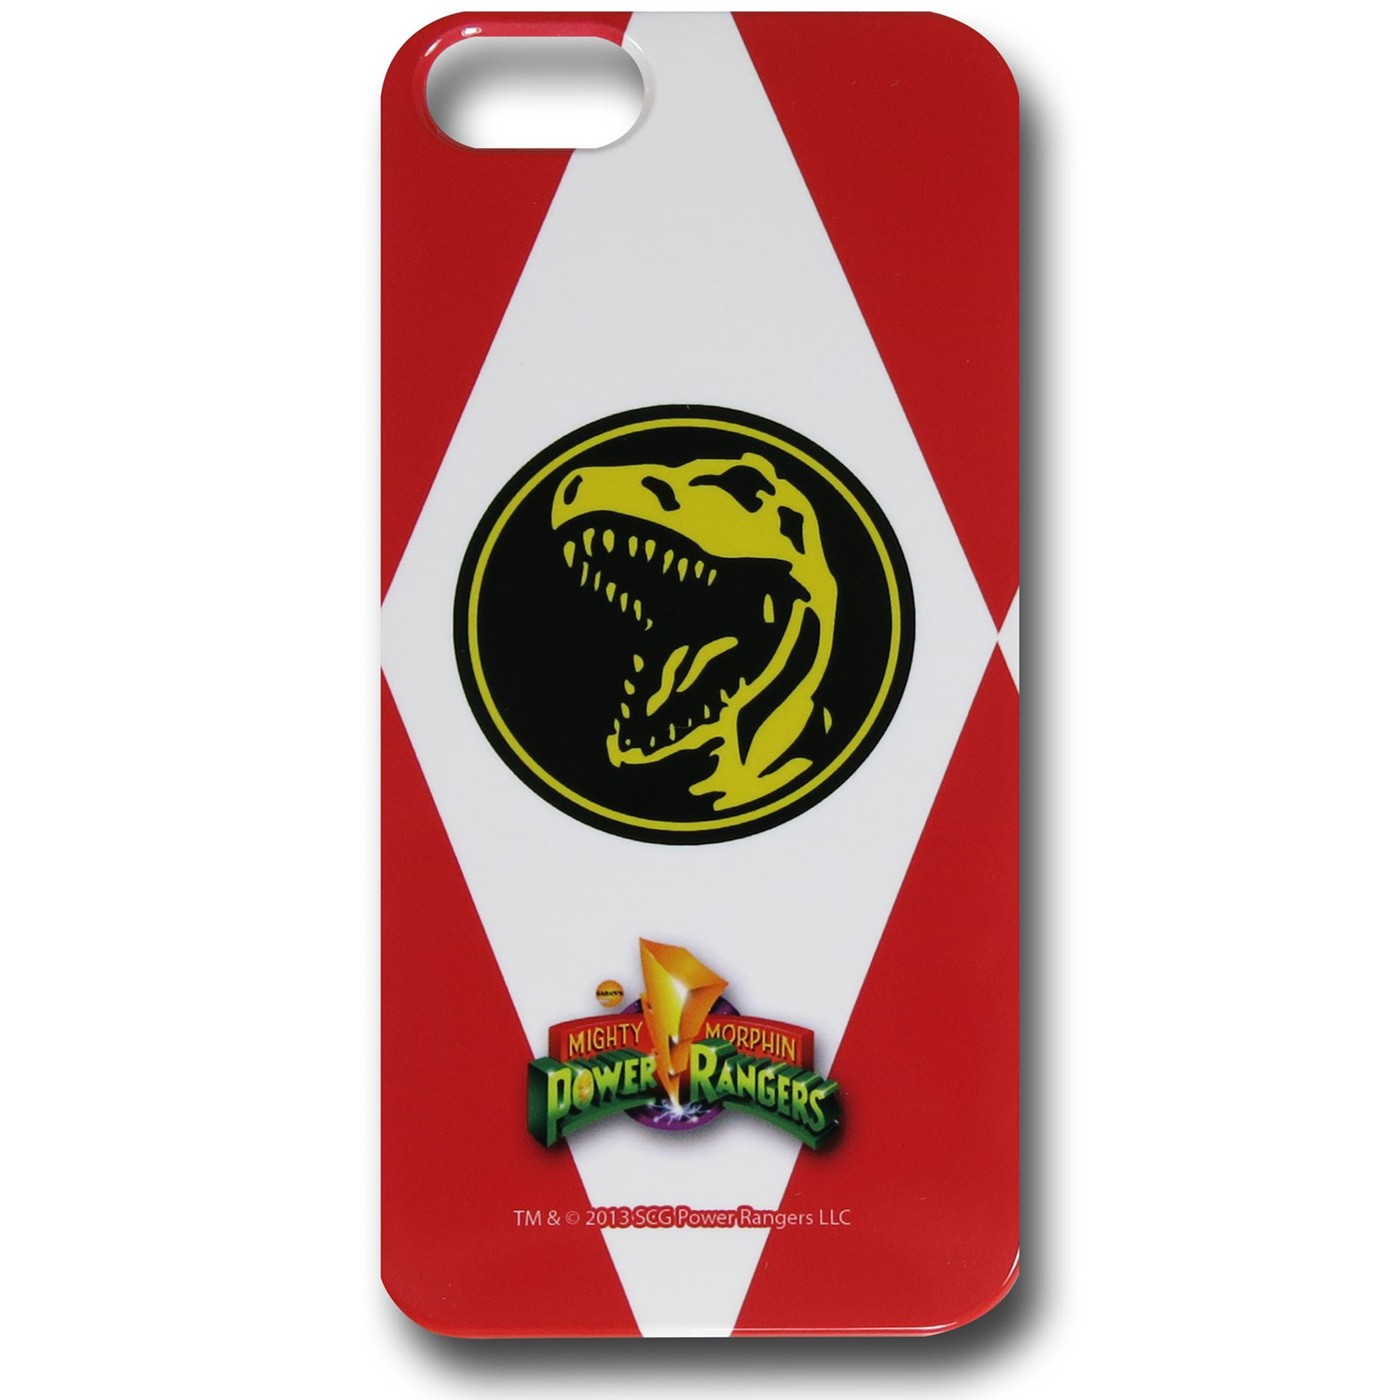 Power Rangers Red iPhone 5 Snap Case